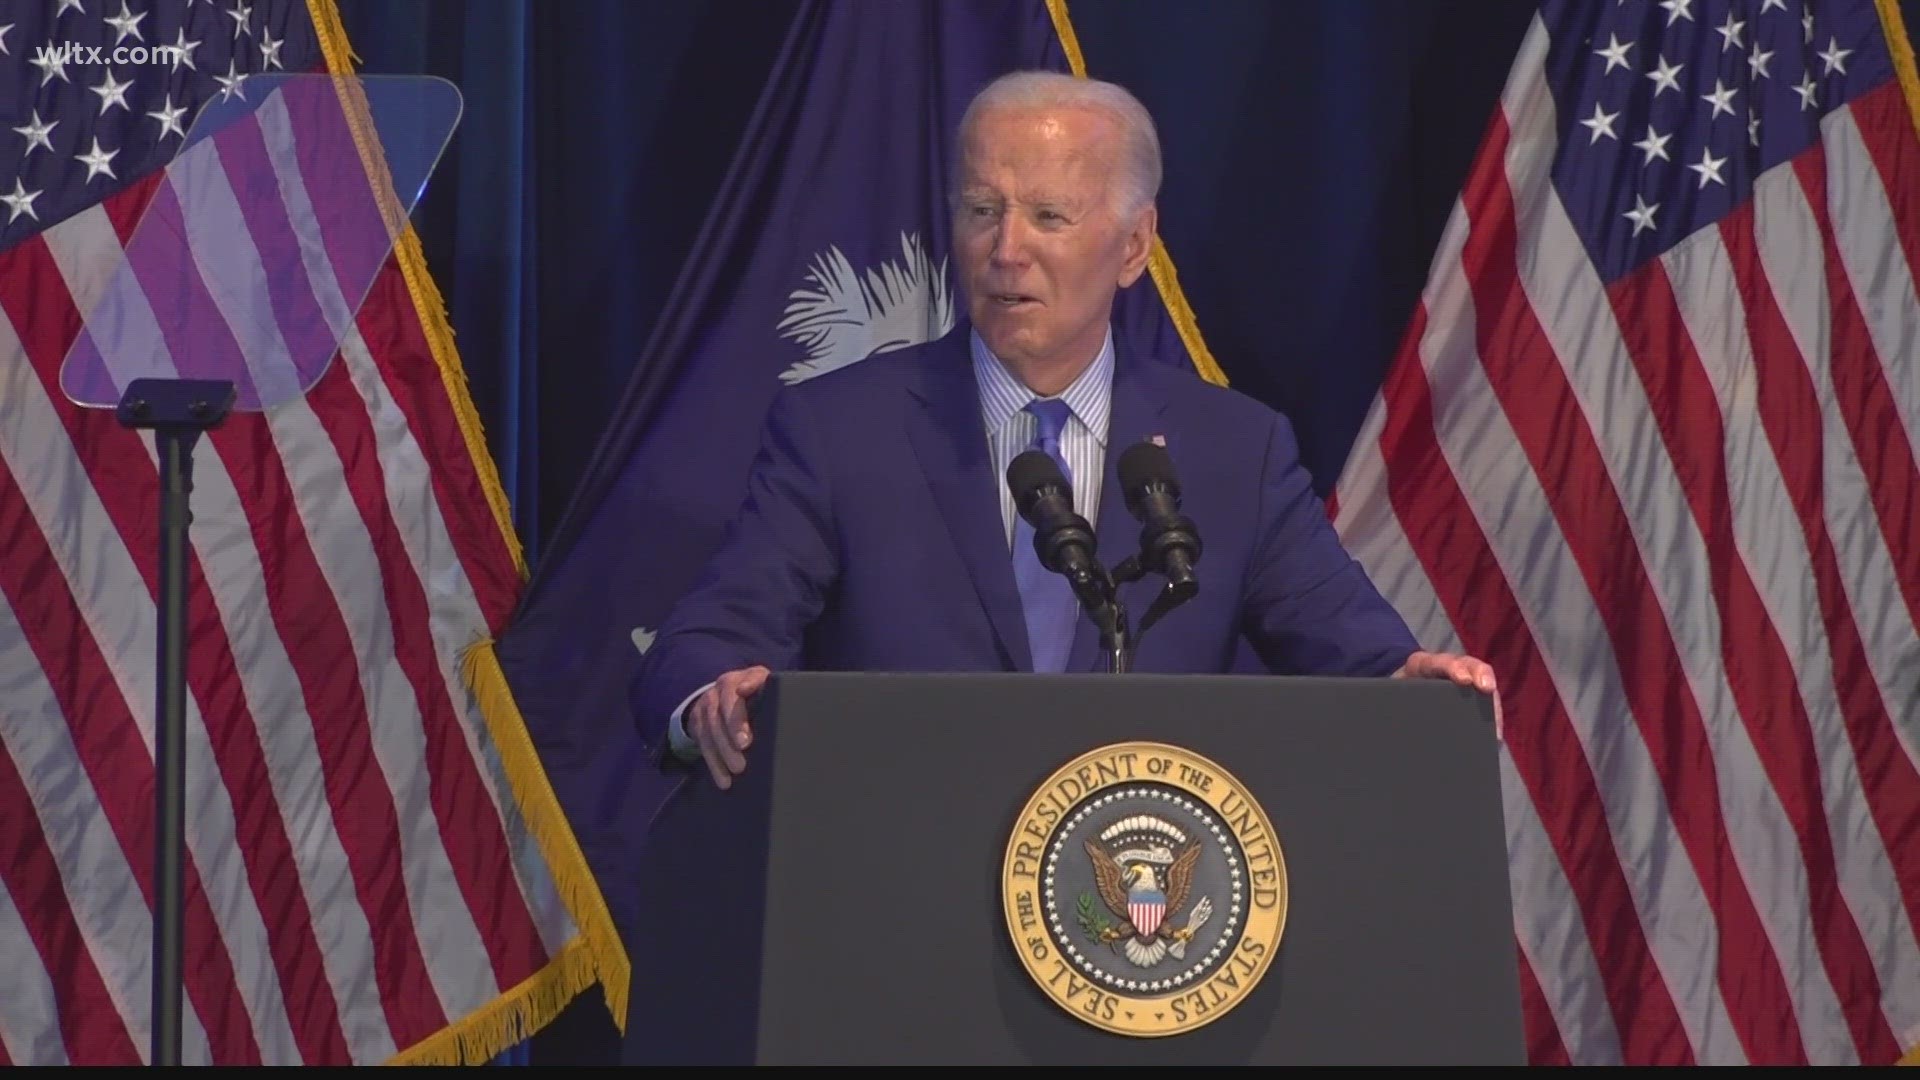 This is Biden's second trip to South Carolina this month. He spoke earlier in the month at the pulpit of Mother Emanuel AME Church in Charleston.